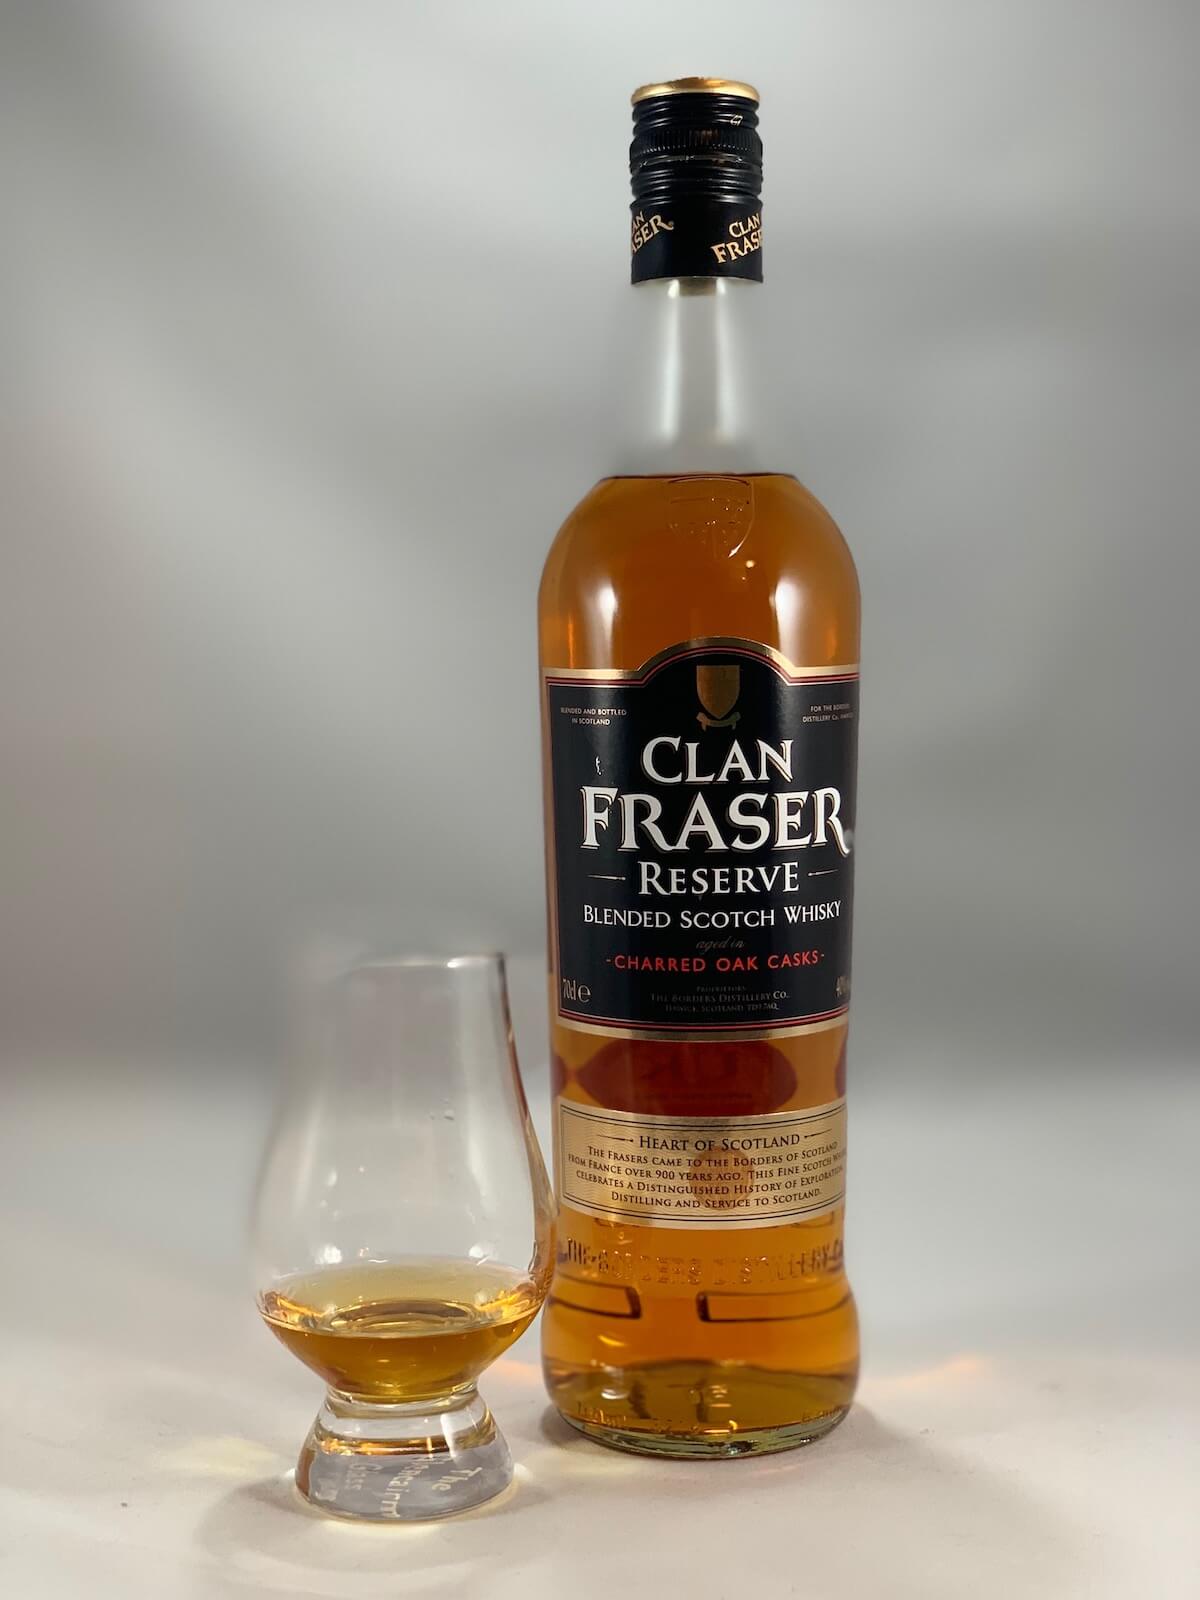 Clan Fraser Reserve scotch whisky in bottle and glass.